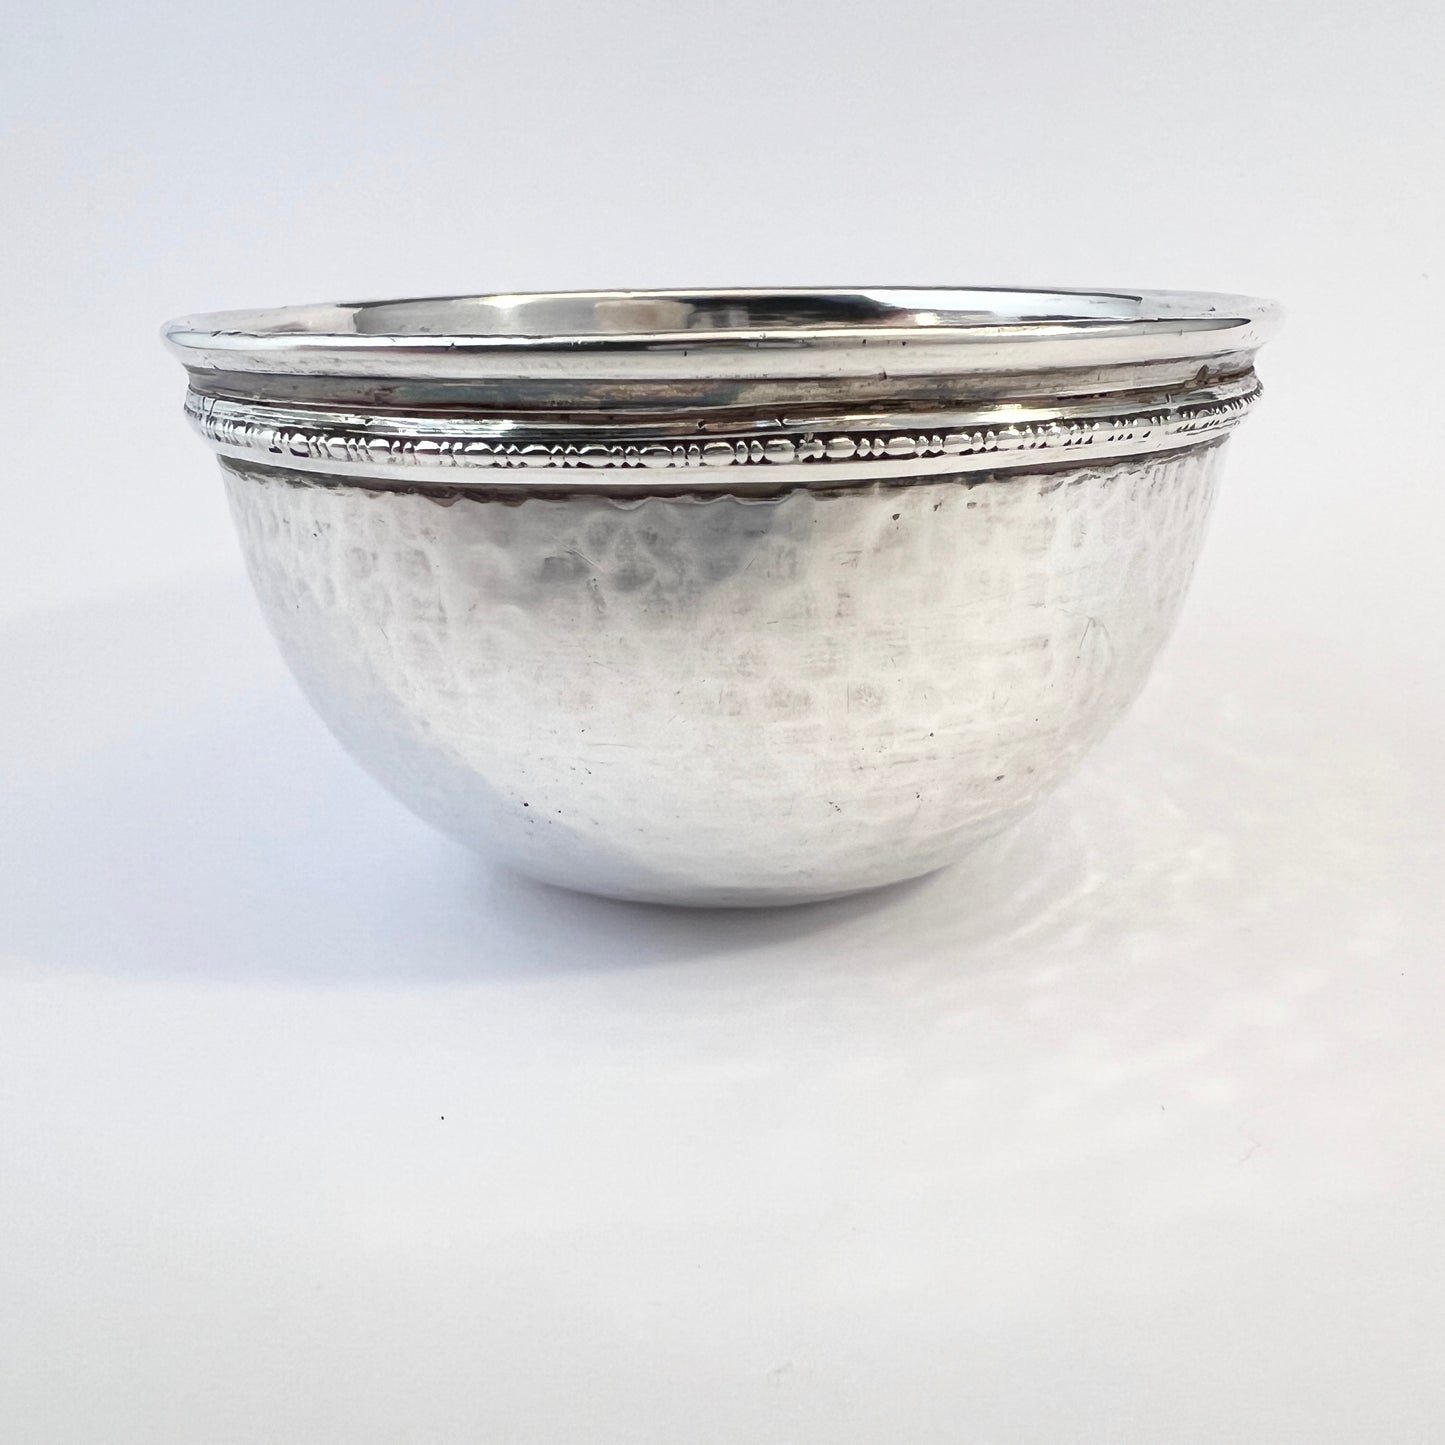 Sybil Dunlop, London 1921. Arts and Crafts Sterling Silver Tumbler Cup